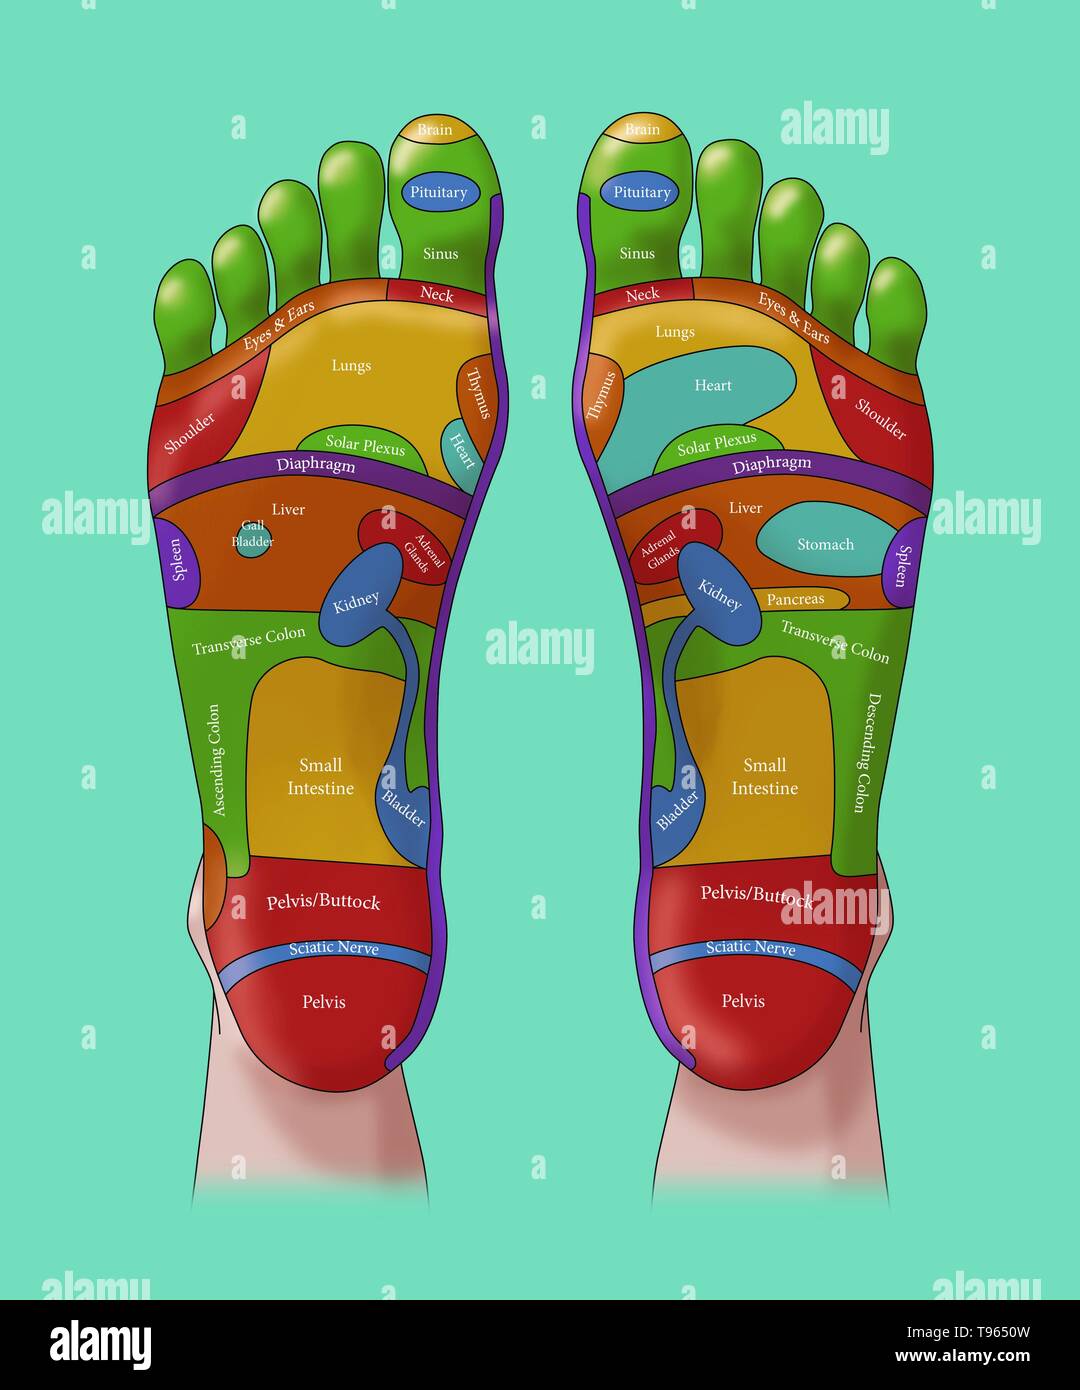 Illustration of the feet, showing foot reflexology zones. Foot reflexology is a form of alternative medicine in which zones of the feet are believed to correspond to different parts of the body. Stock Photo